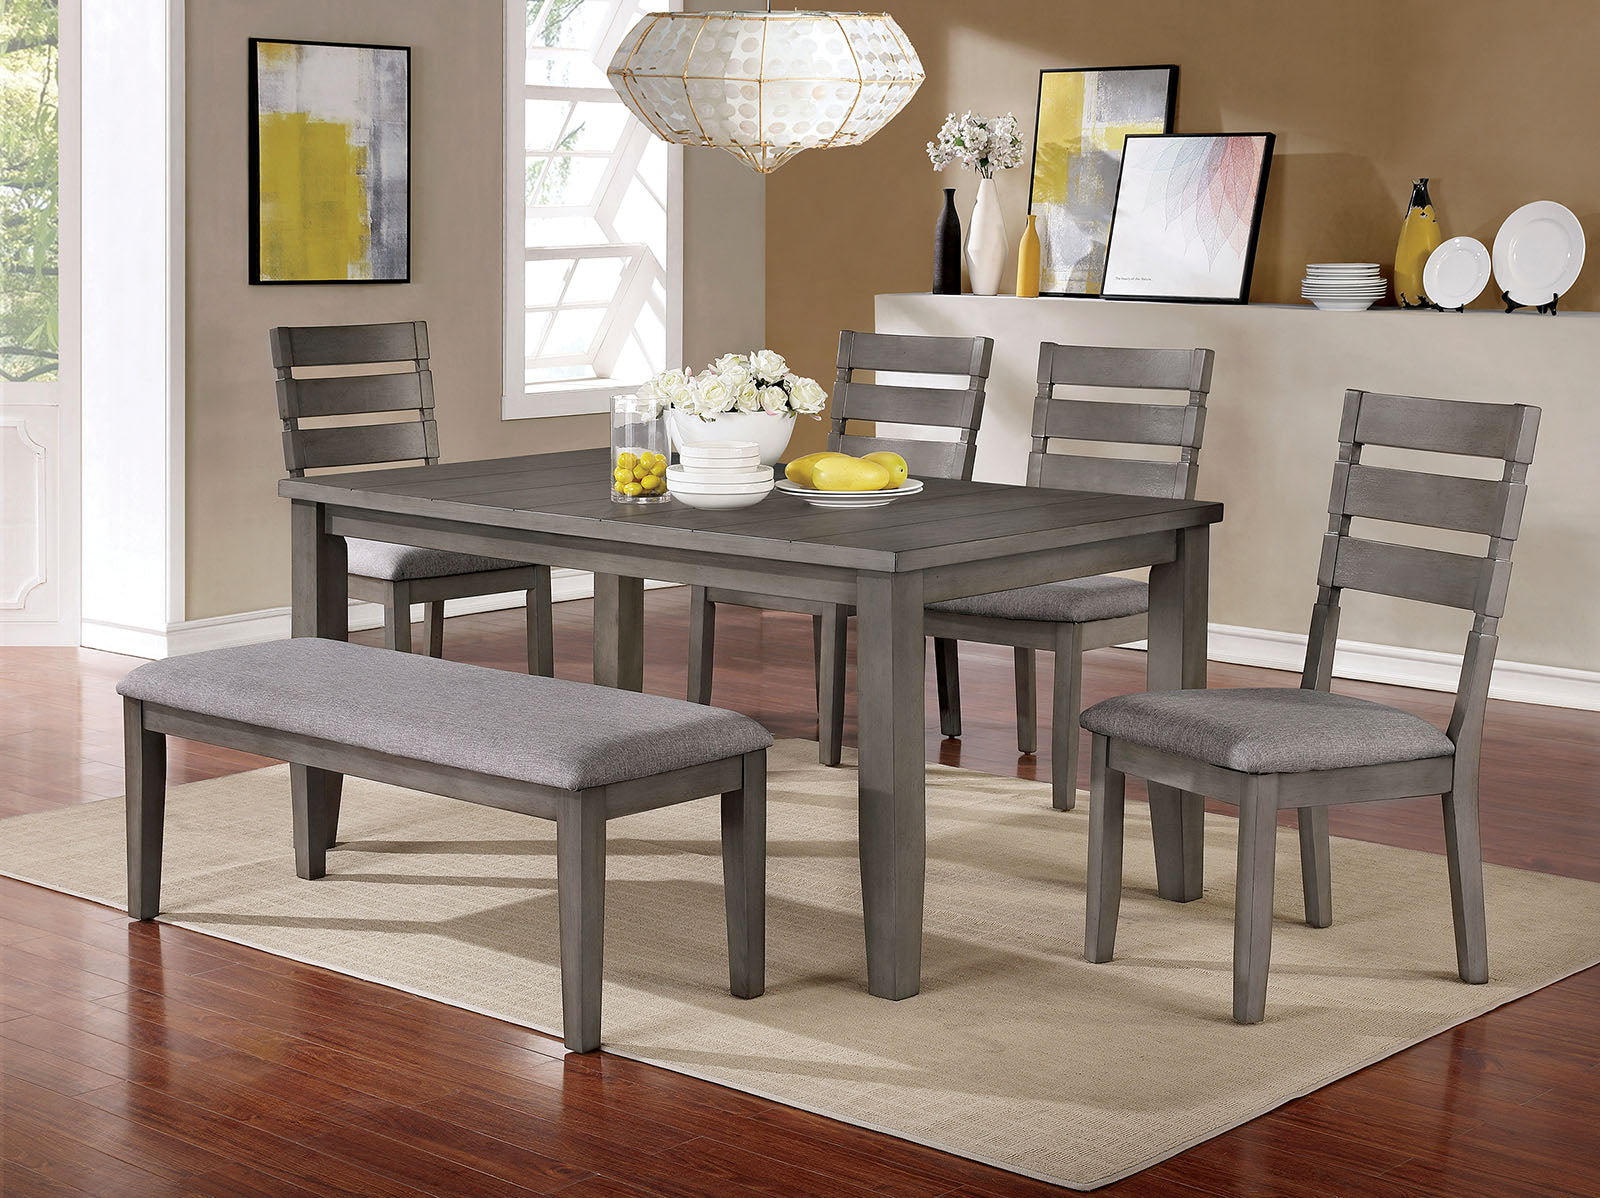 VIANA 6 Pc. Dining Table Set w/ Bench image